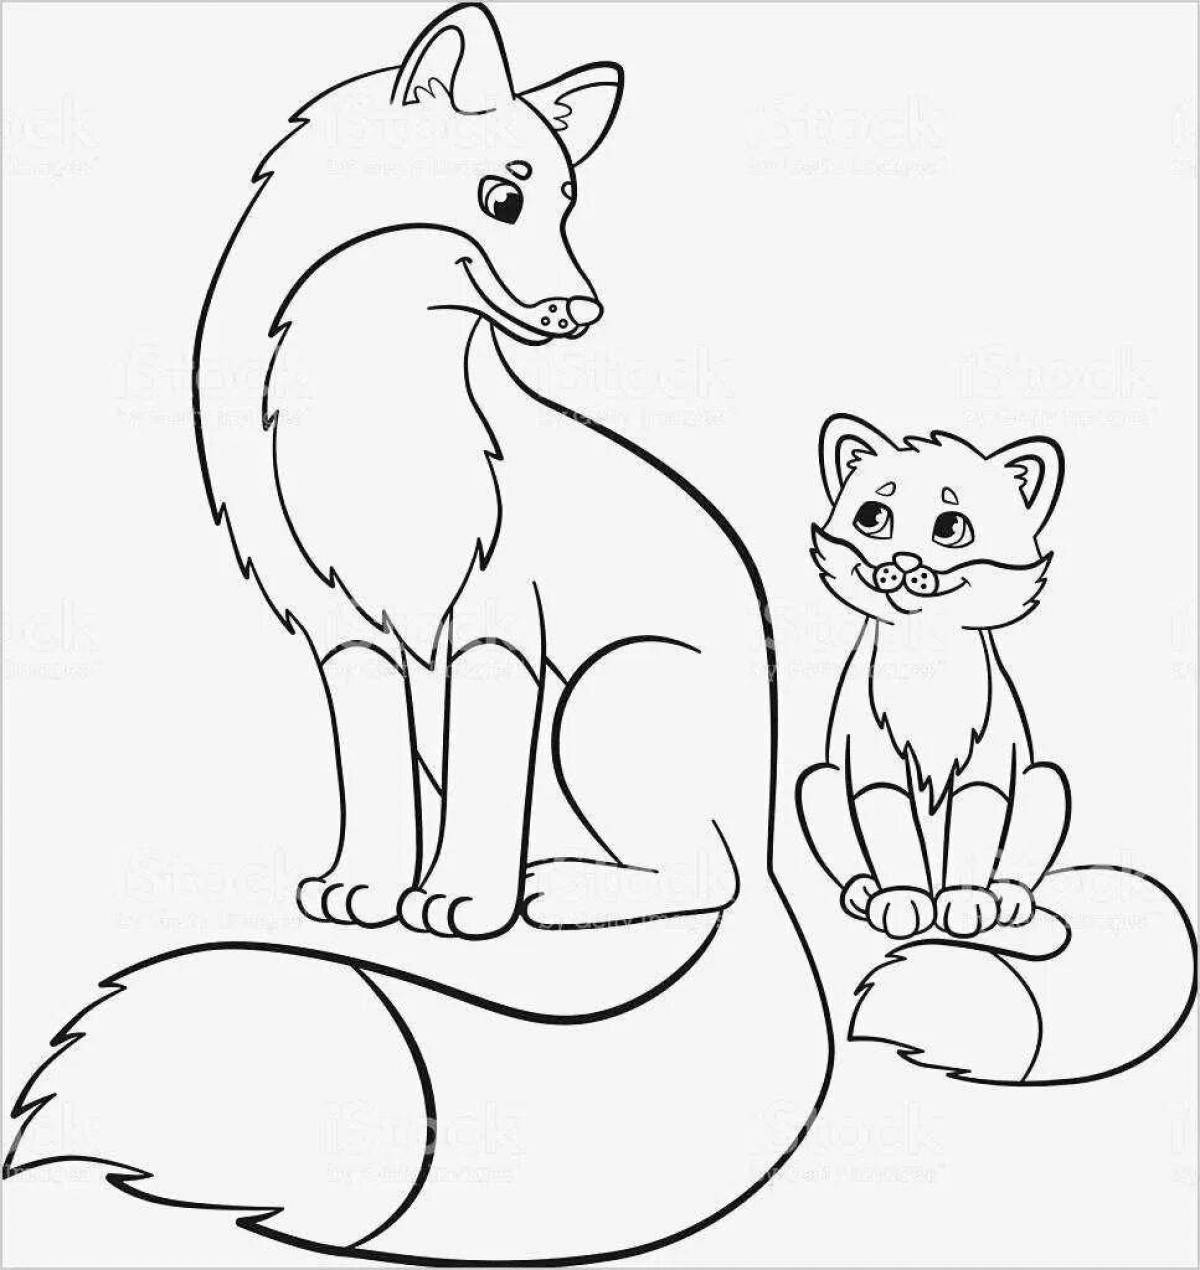 Adorable fox tail coloring book